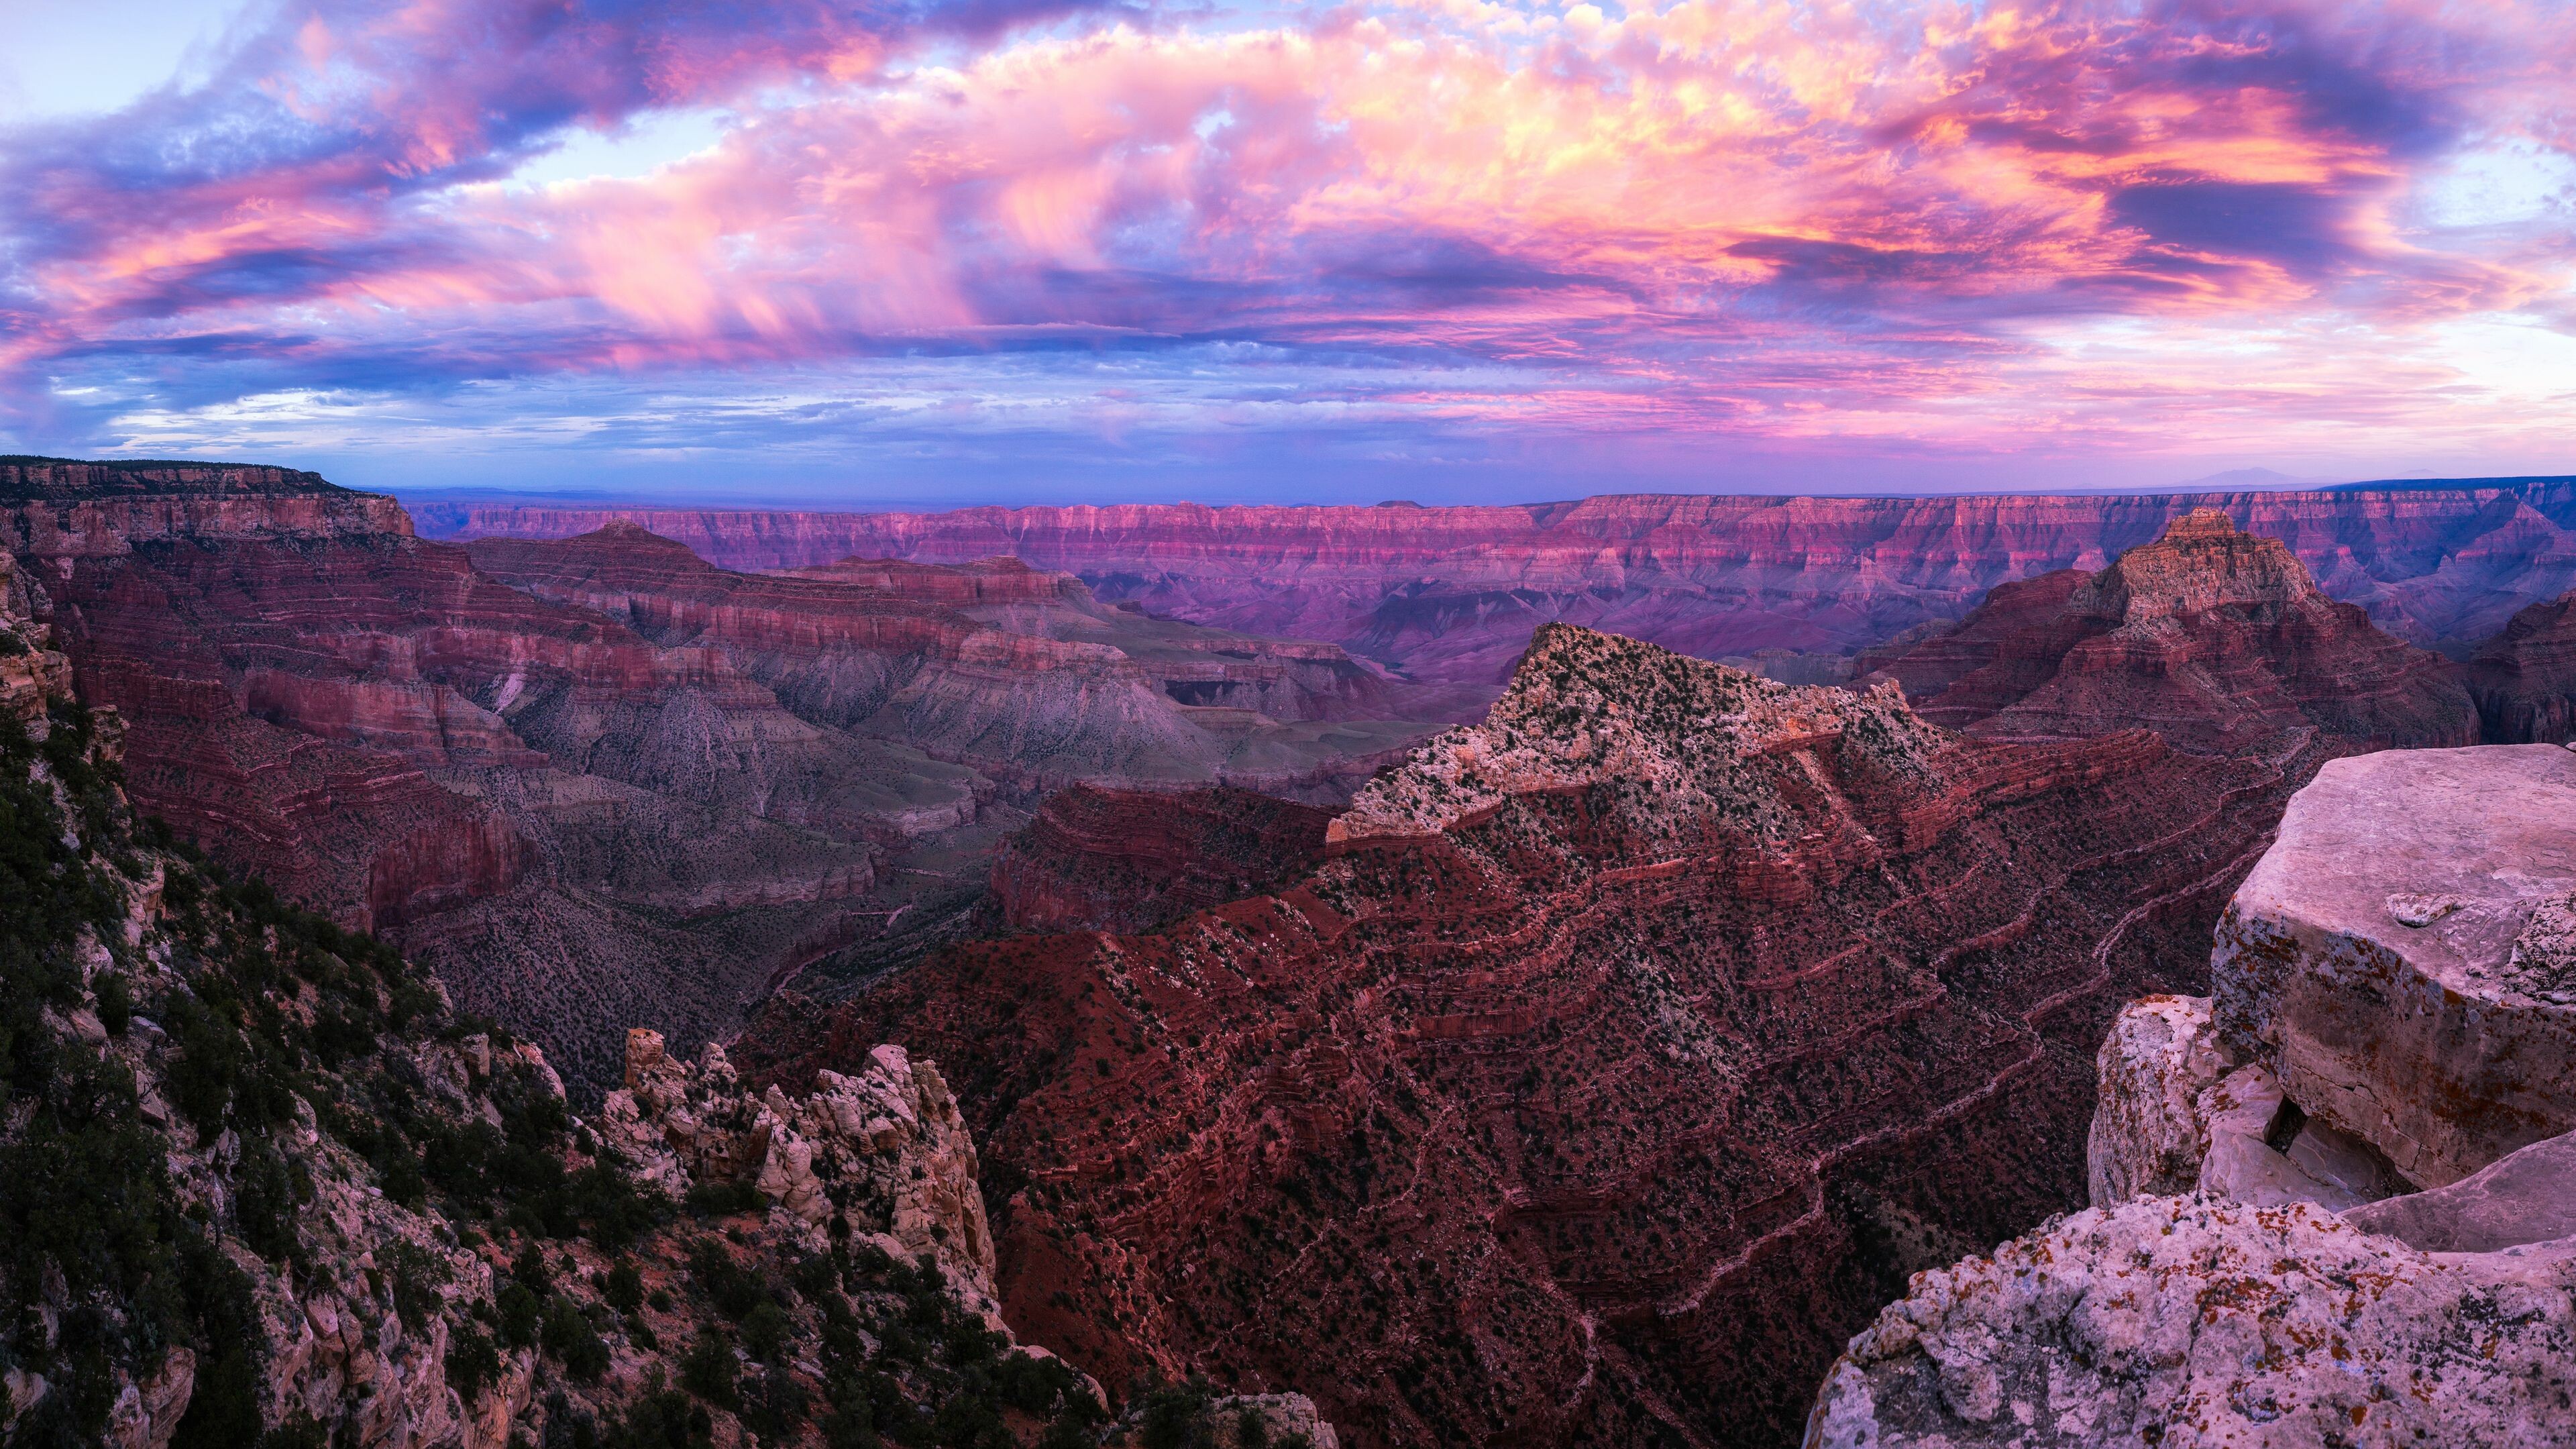 Grand Canyon: A steep-sided canyon carved by the Colorado River in Arizona, United States. 3840x2160 4K Wallpaper.